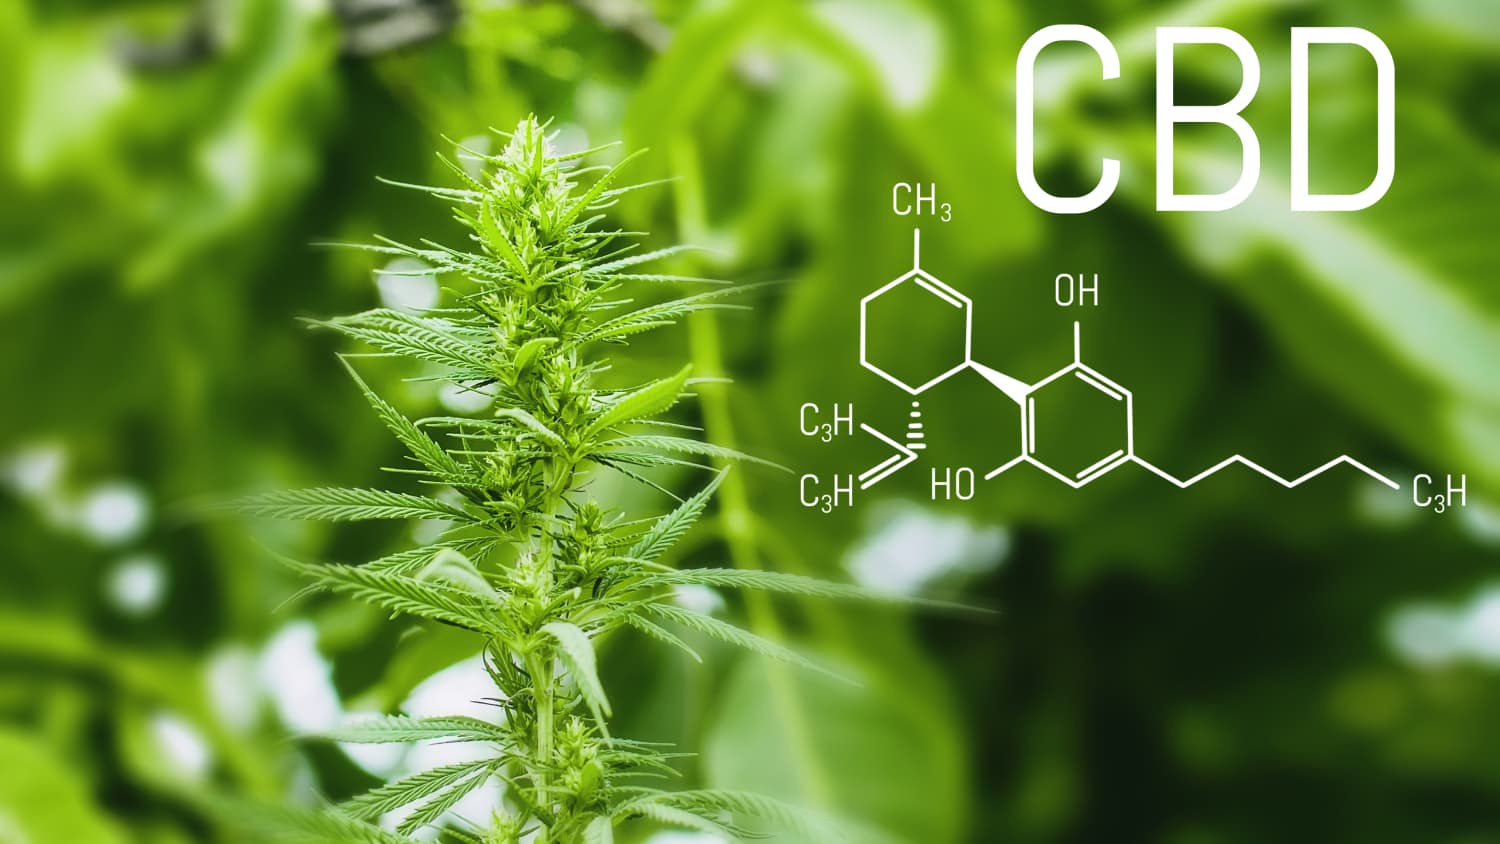 Can Cannabinoids Help Lupus and Other Diseases? > News > Yale Medicine